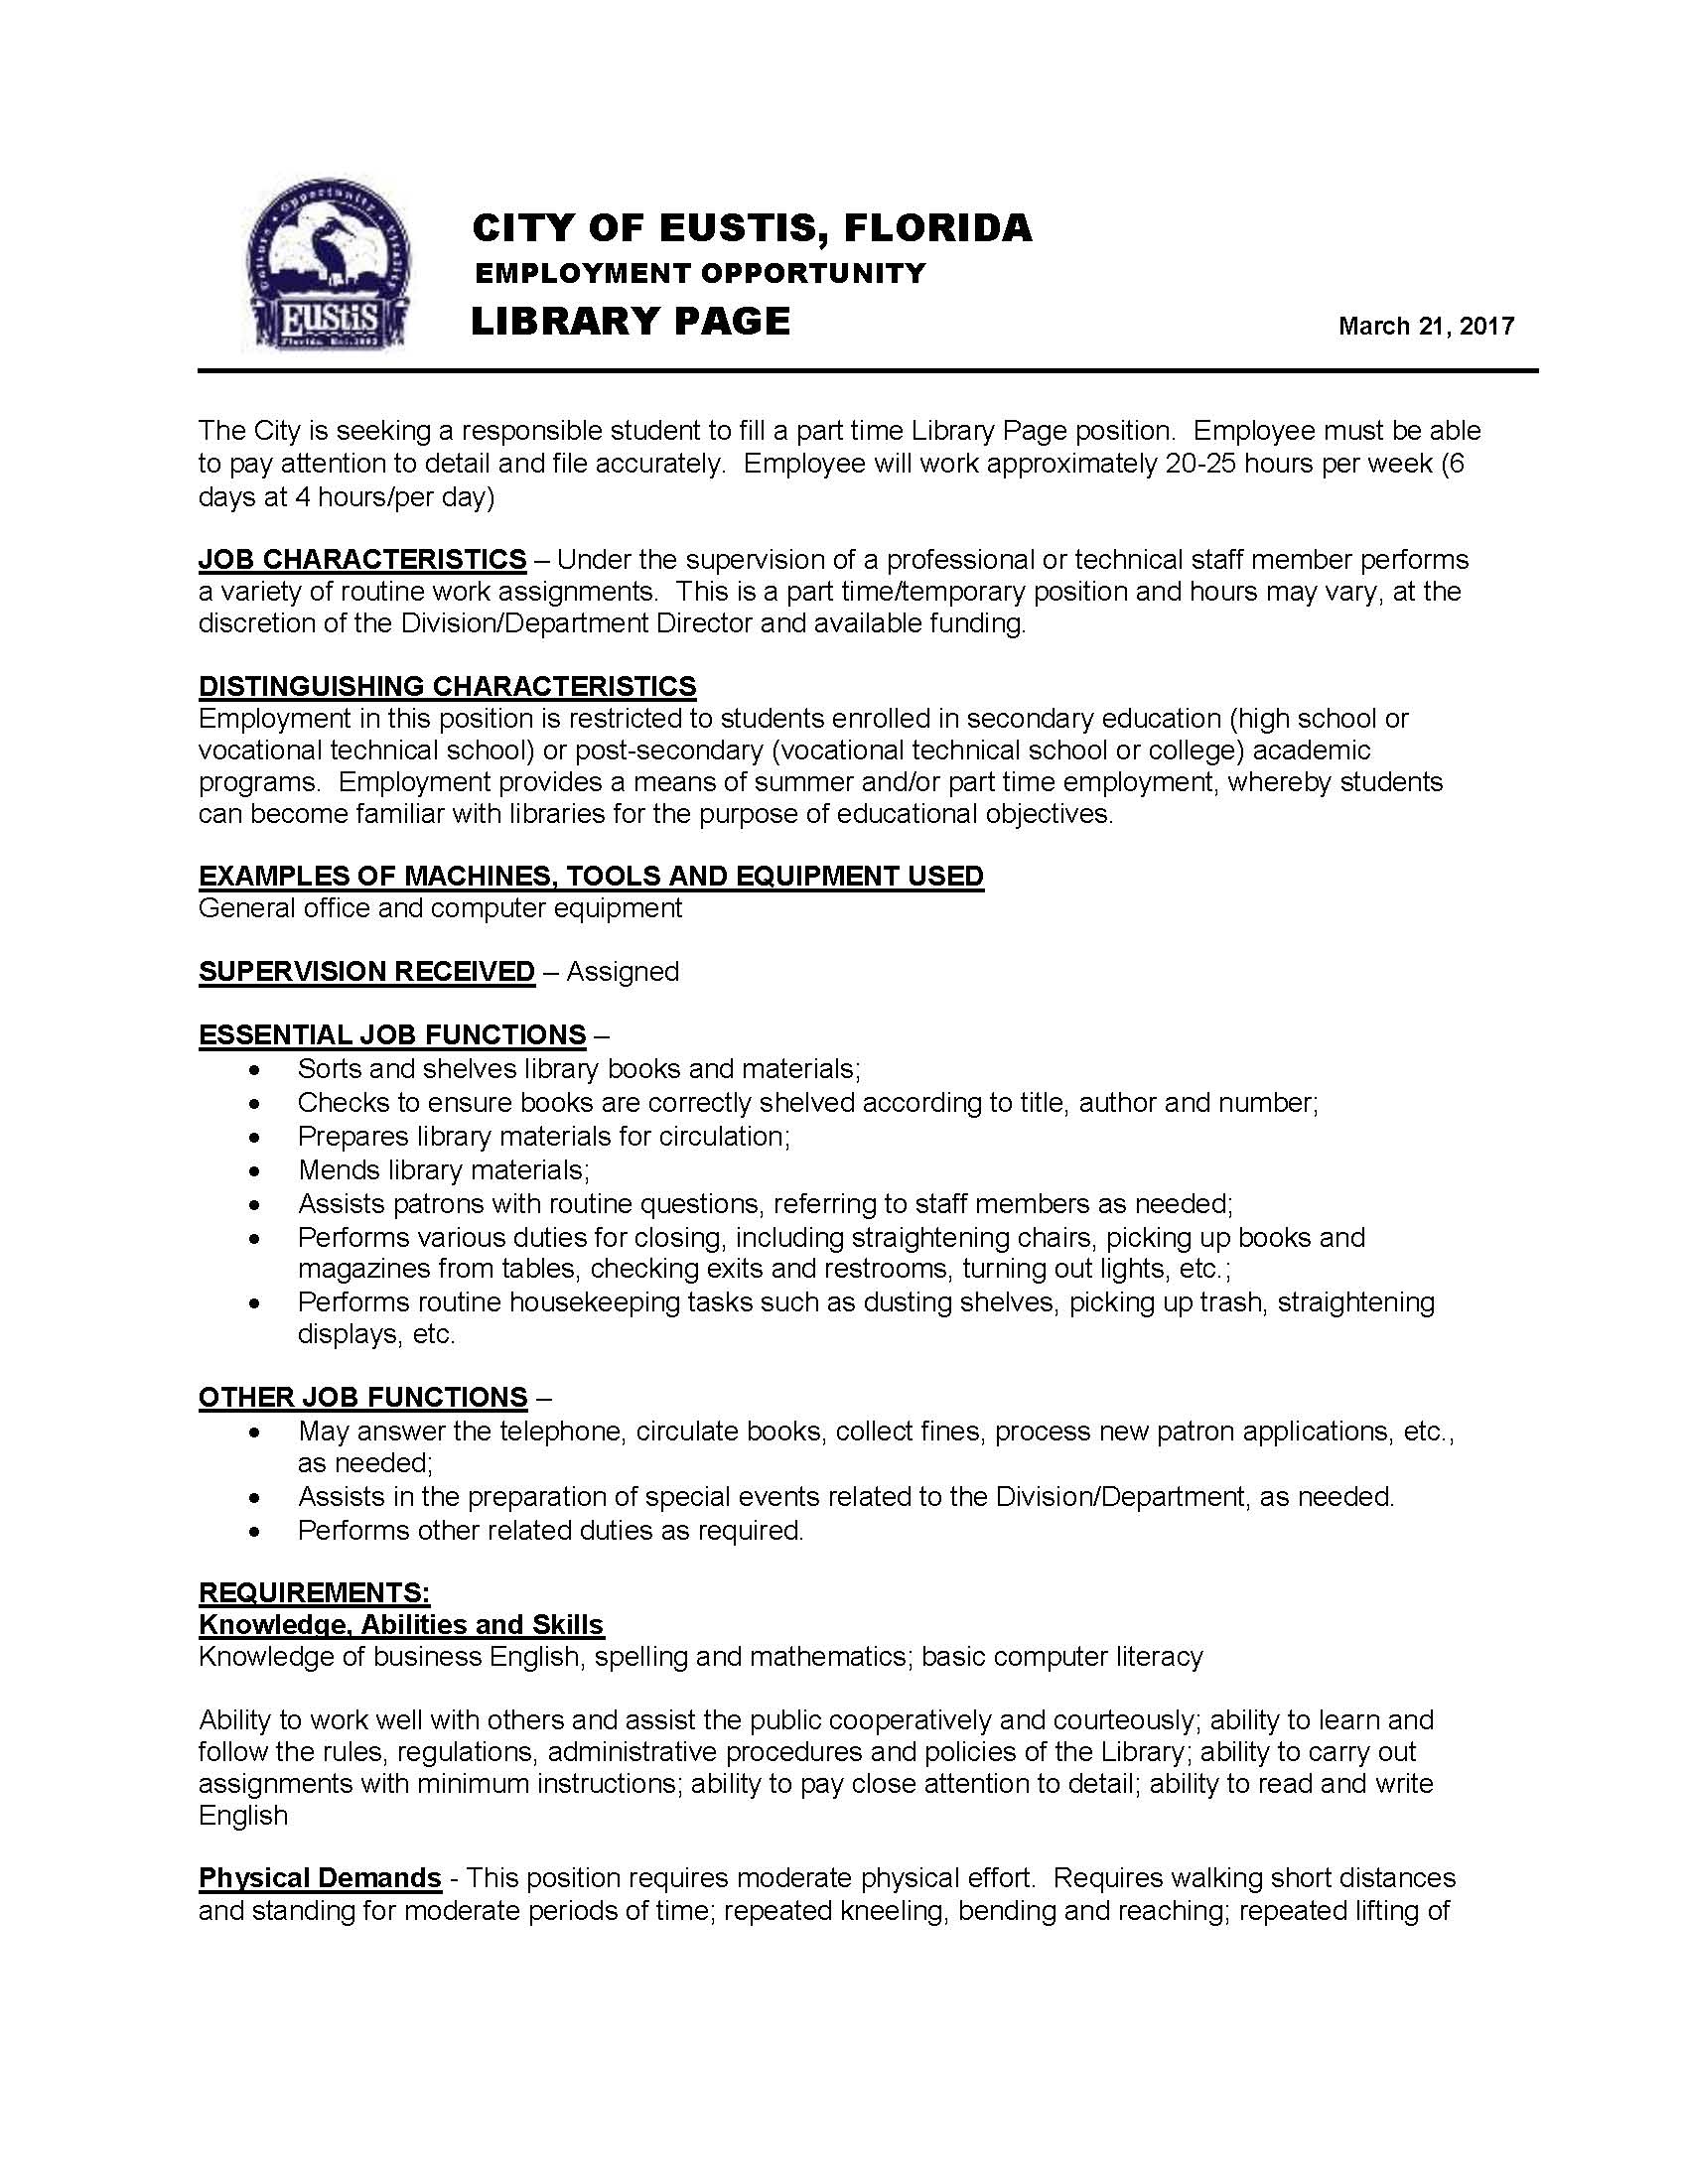 City of Eustis Hiring Library Page